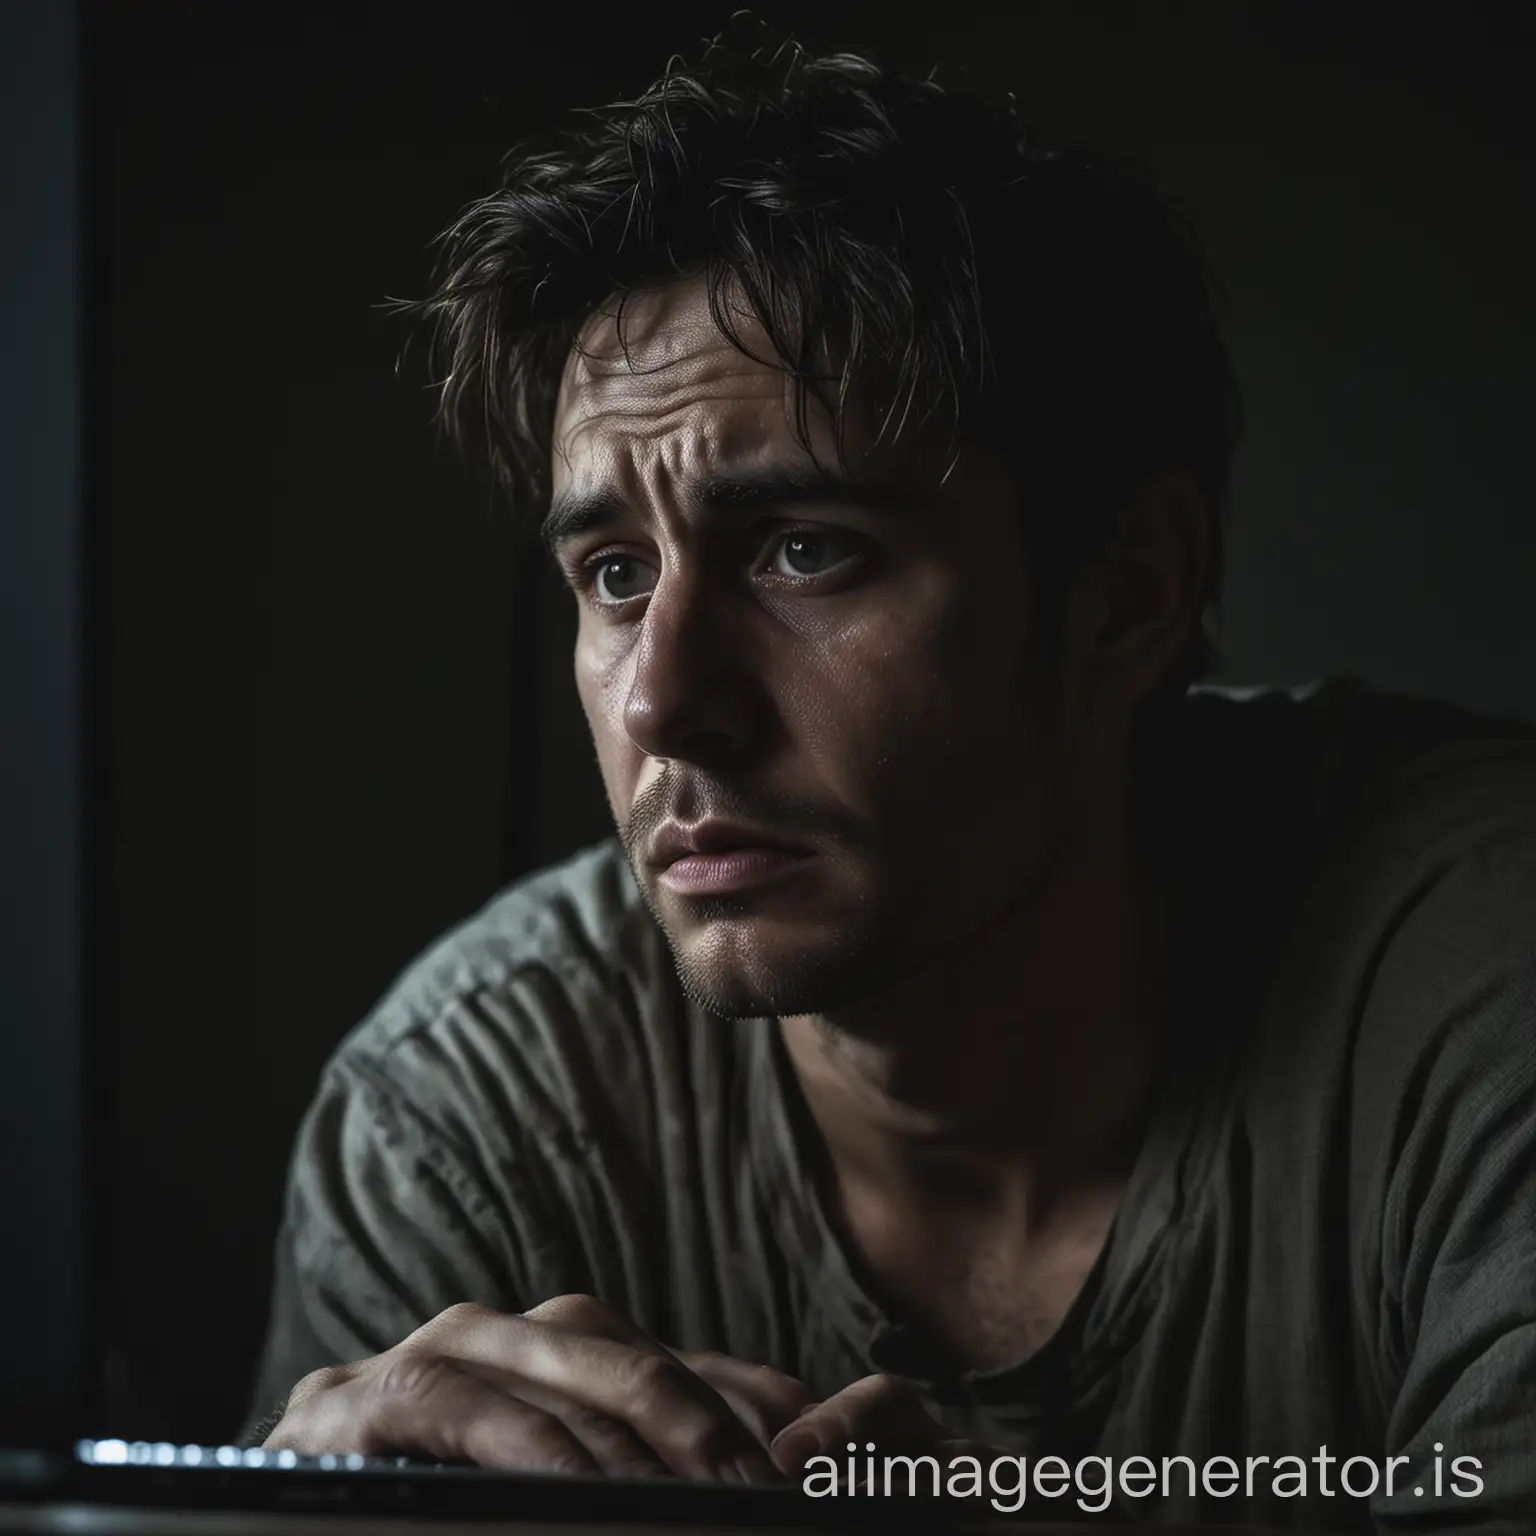 Sad-and-Desperate-Poor-Man-Illuminated-by-Computer-Screen-in-Dark-Room